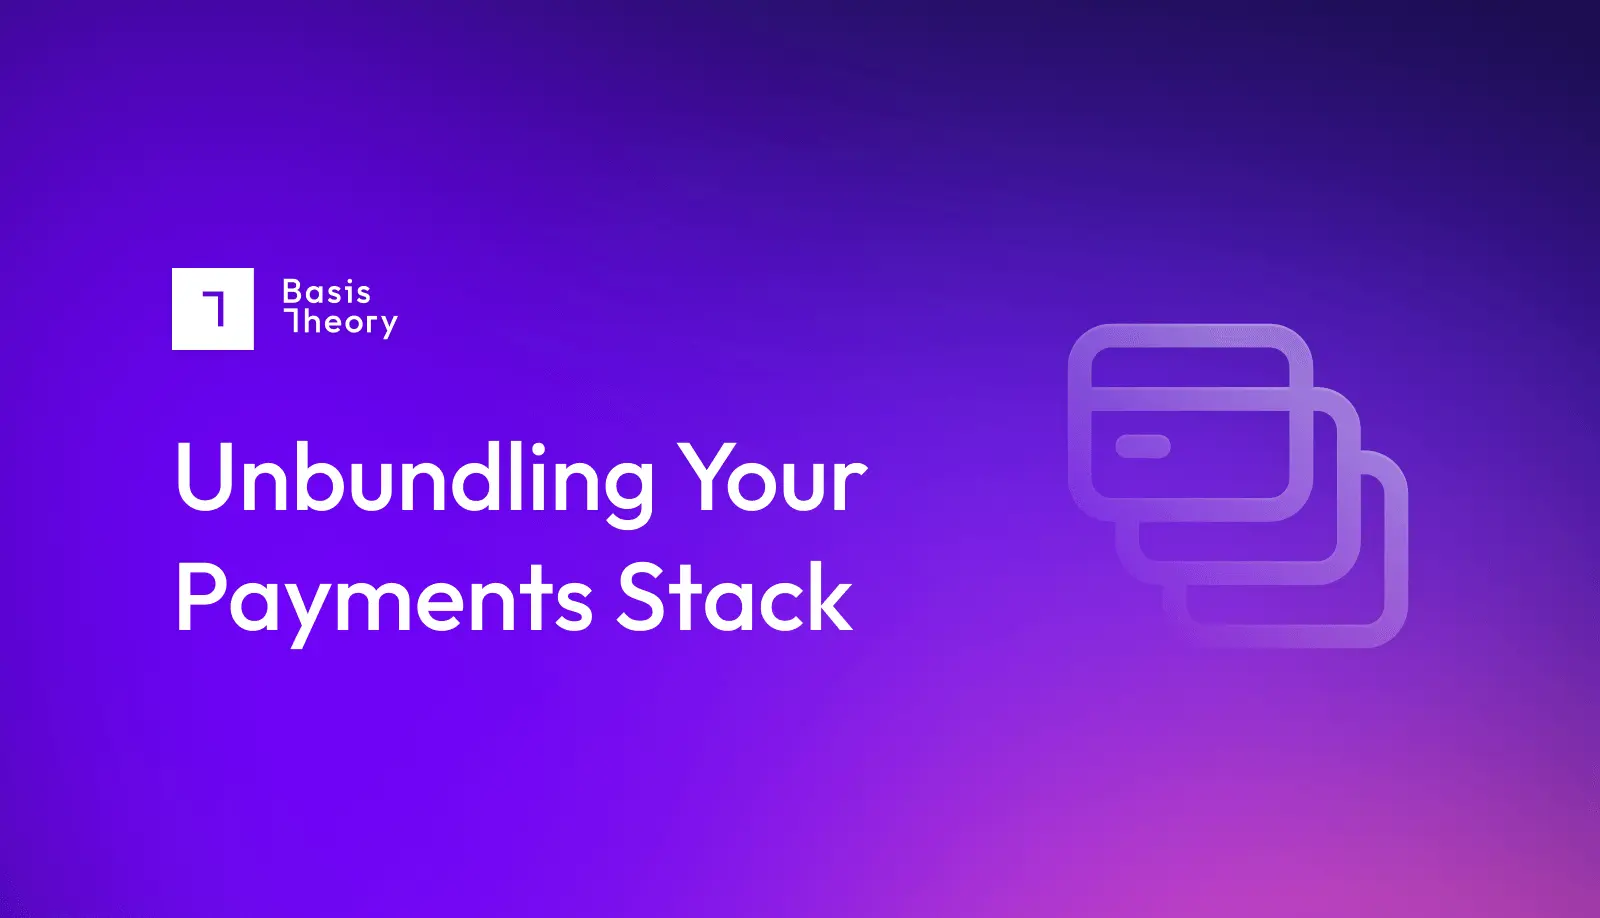 Unbundling your payments stack